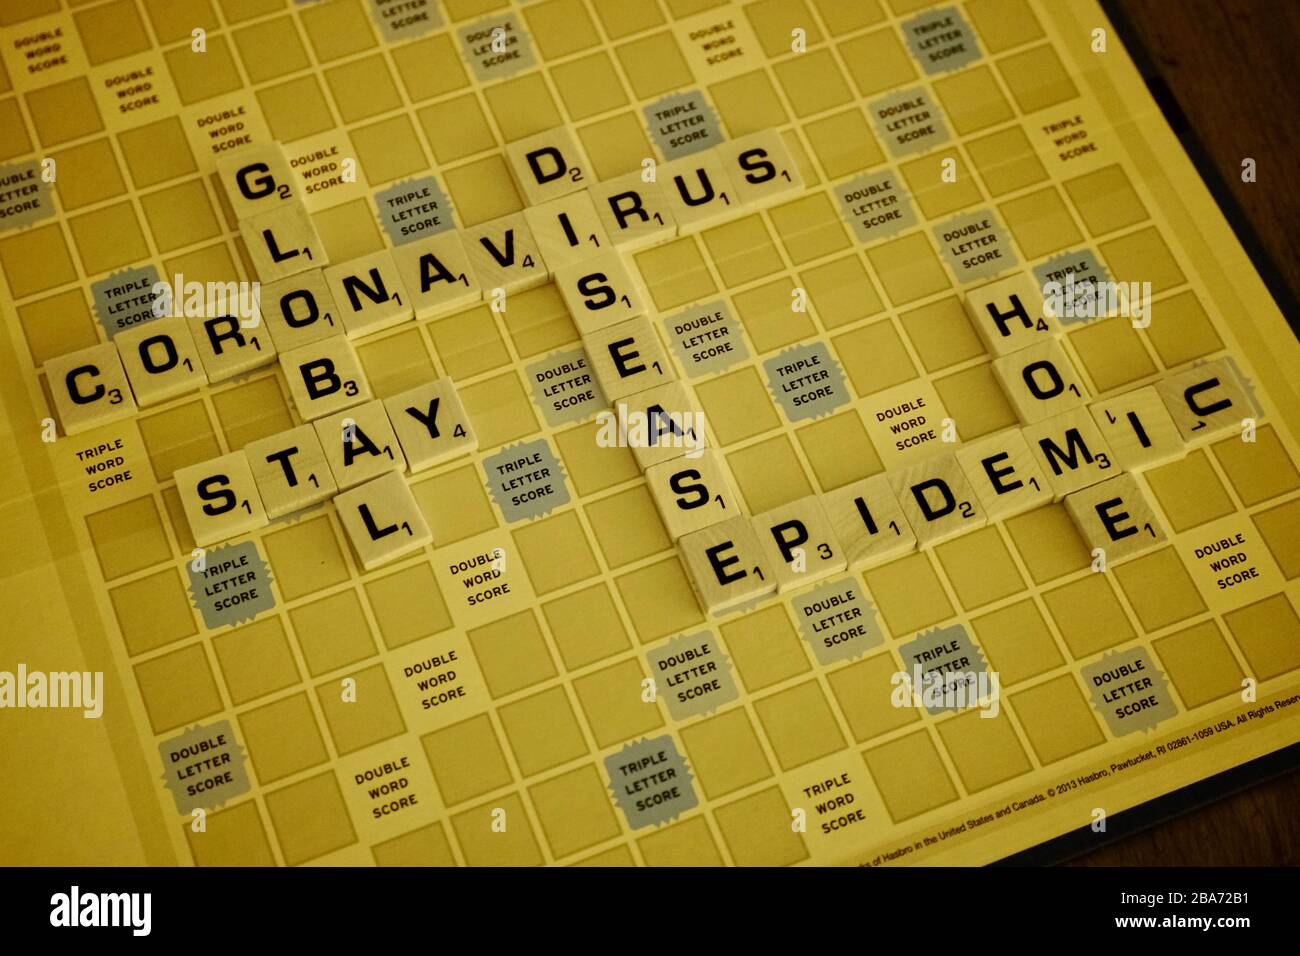 A monopoly board with words regarding the Coronavirus in infrared. Stock Photo